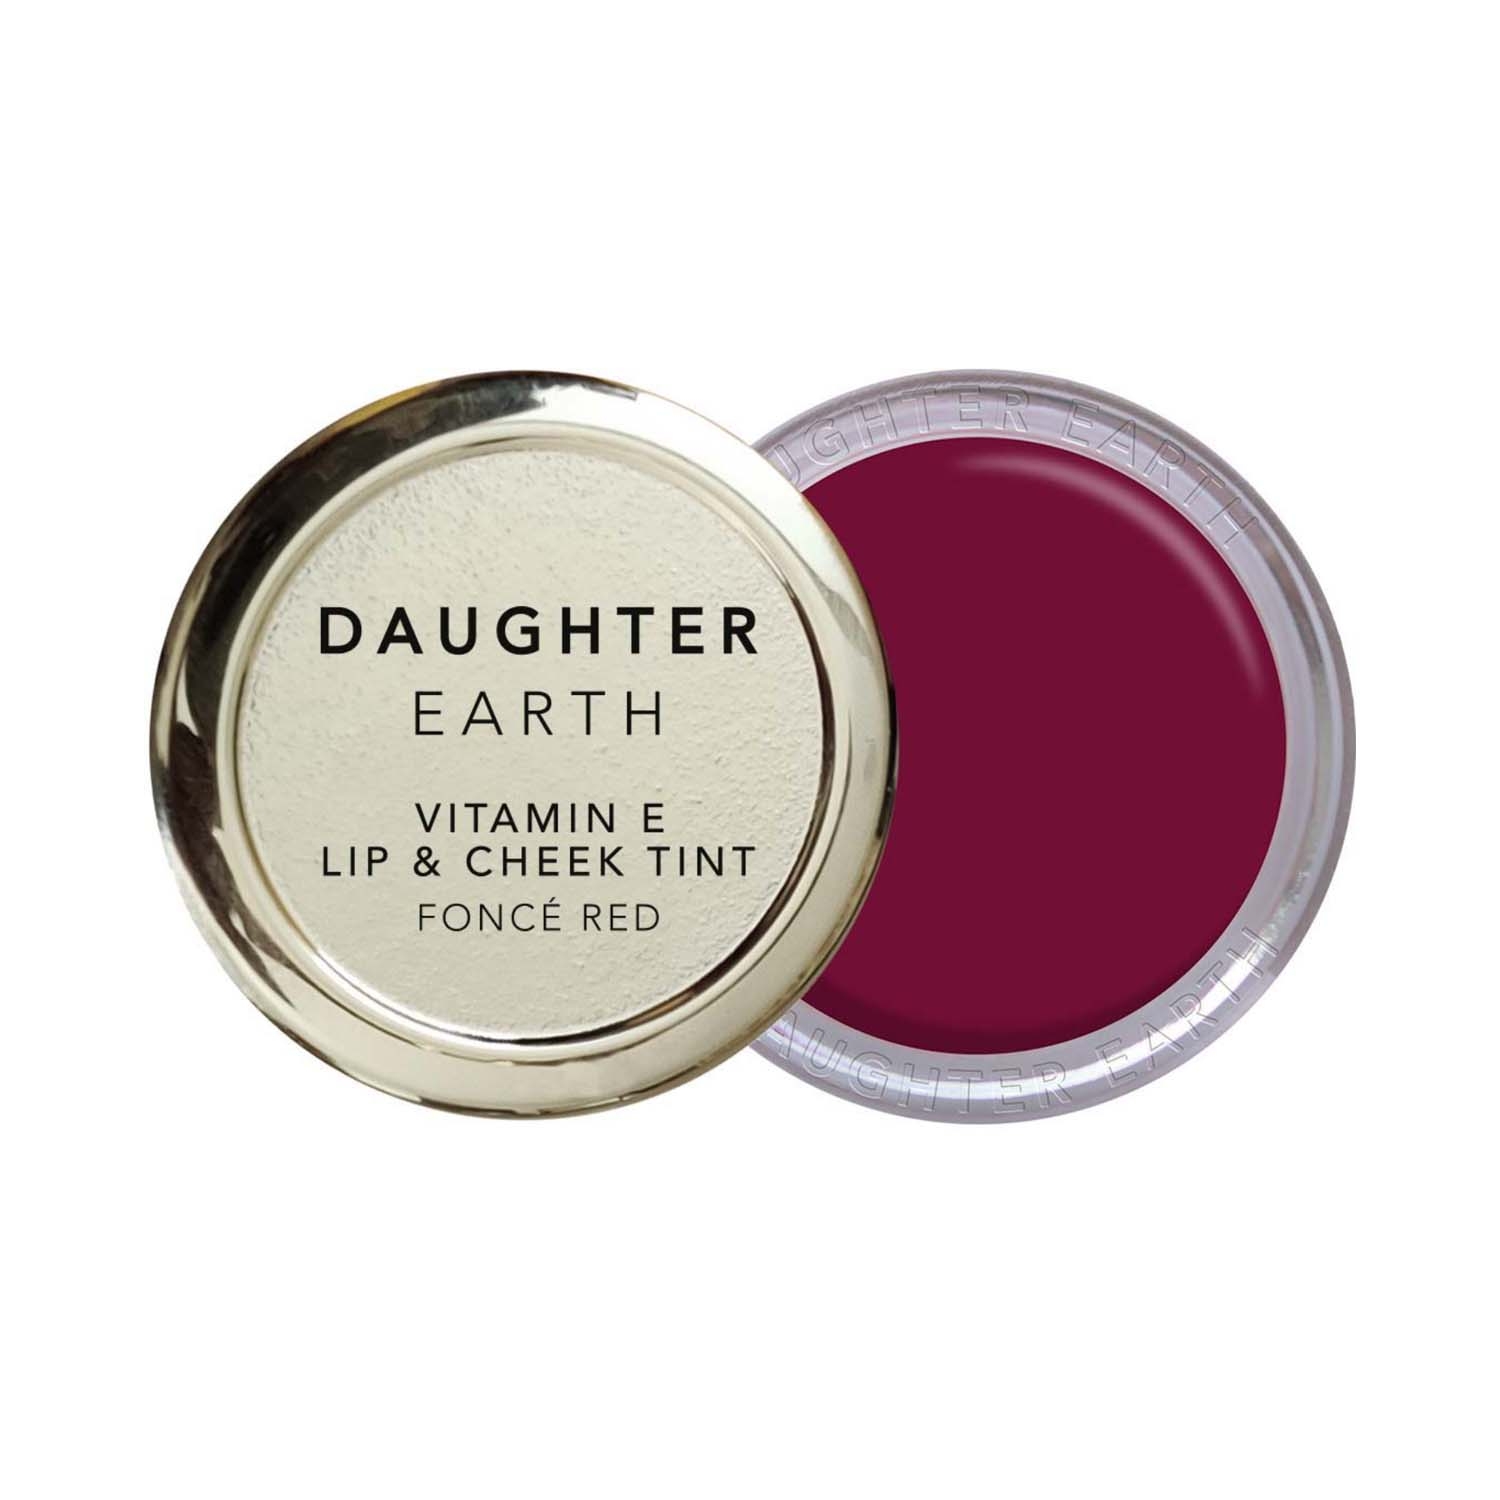 DAUGHTER EARTH | DAUGHTER EARTH Vitamin E Lip & Cheek Tint - Fonce Red (4.5g)